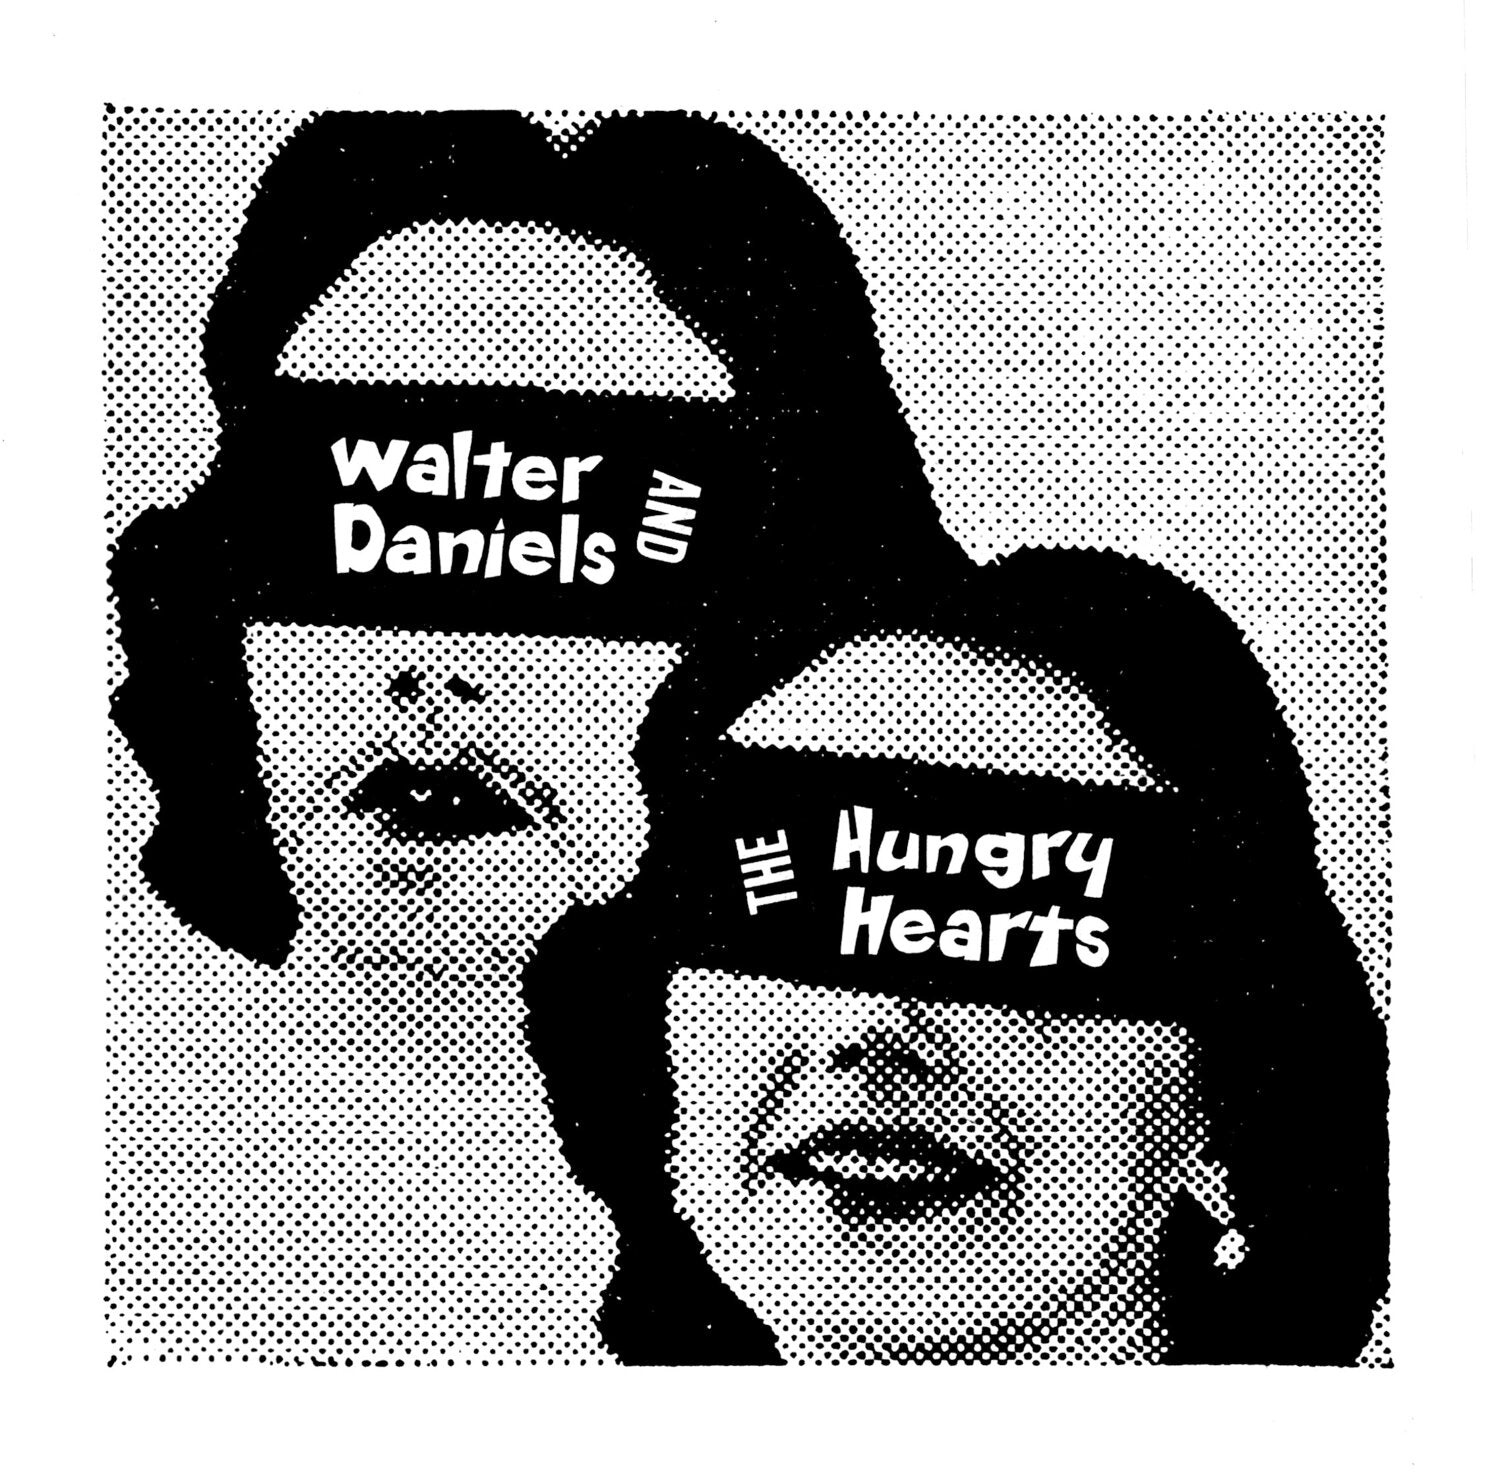 Walter Daniels And The Hungry Hearts - "Out at Dusk" b/w "Where's the Pain Point"